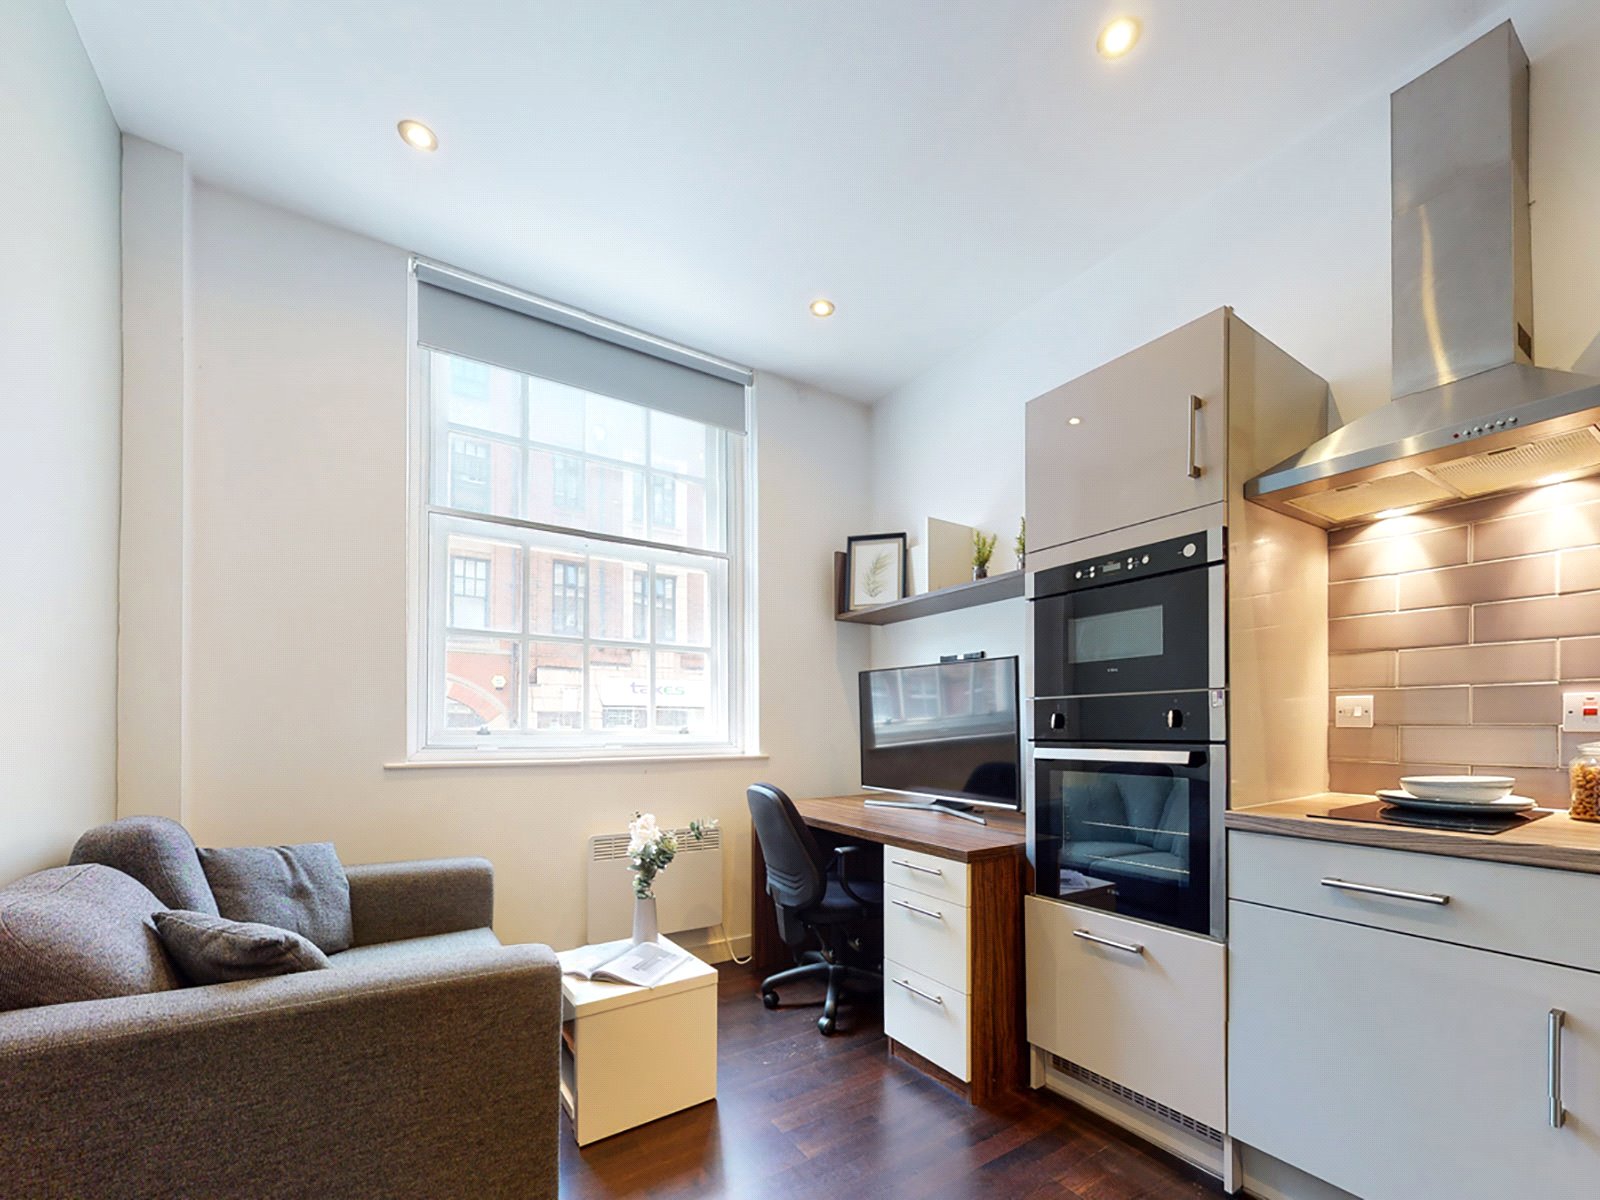 0 bed apartment for rent in Leeds. From YPP - Sheffield